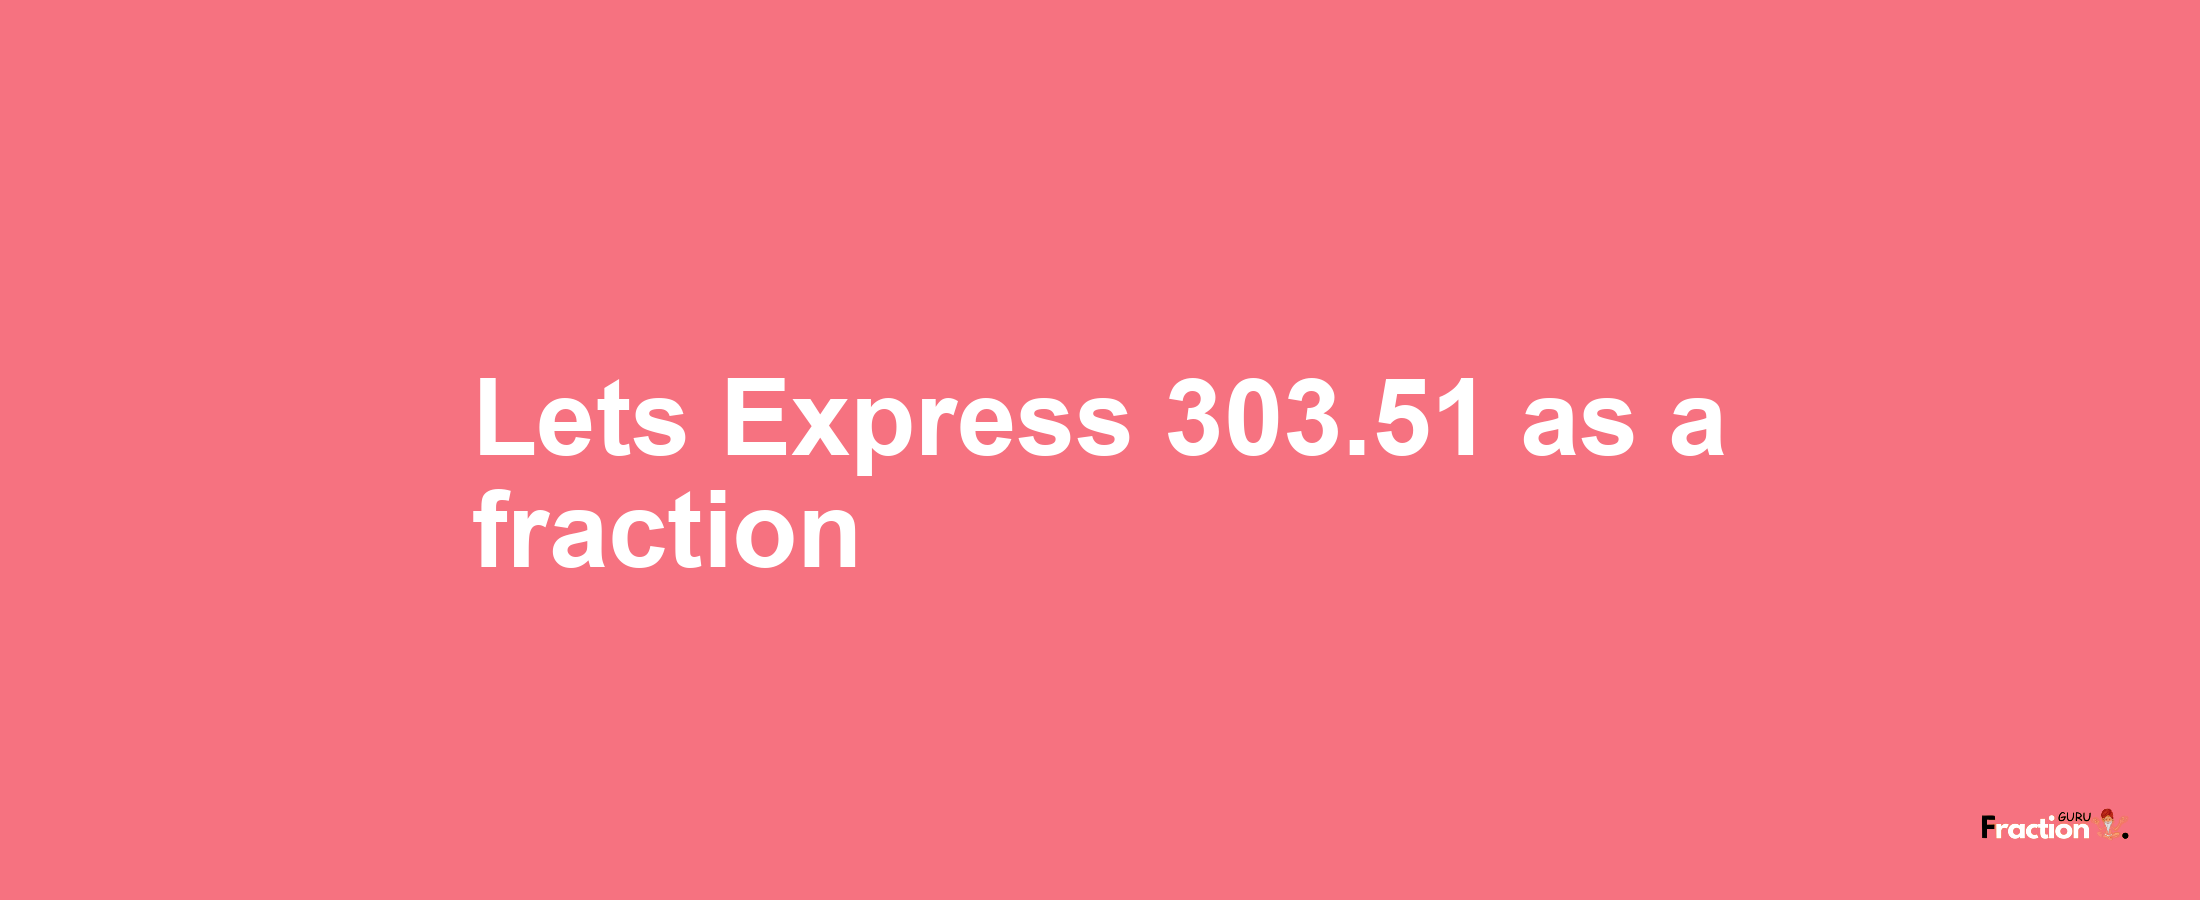 Lets Express 303.51 as afraction